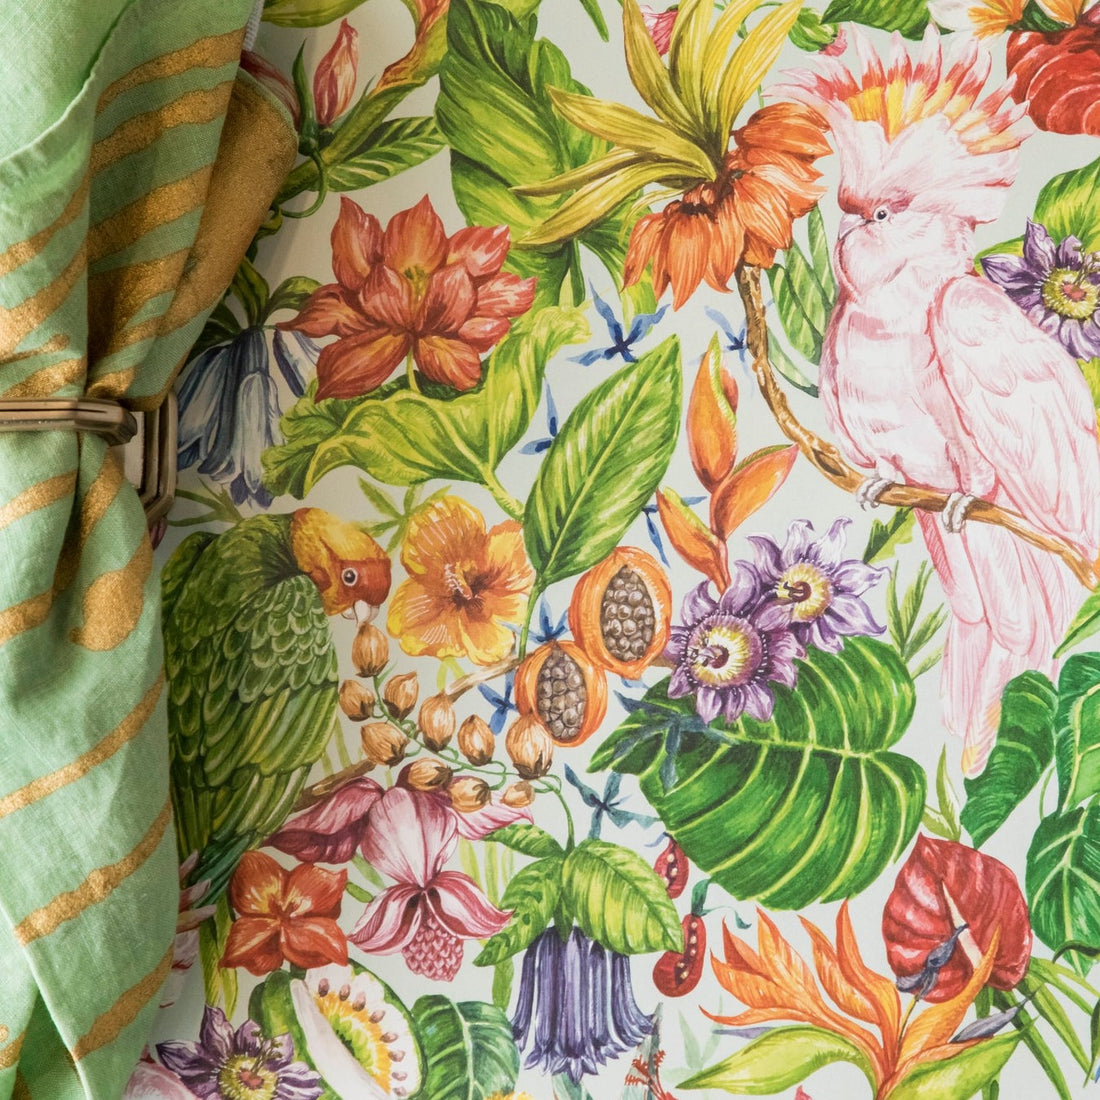 A close-up of the Birds of Paradise Placemat, showing the detailed floral design and the pick cockatoo, with a fabric napkin on the left side. 